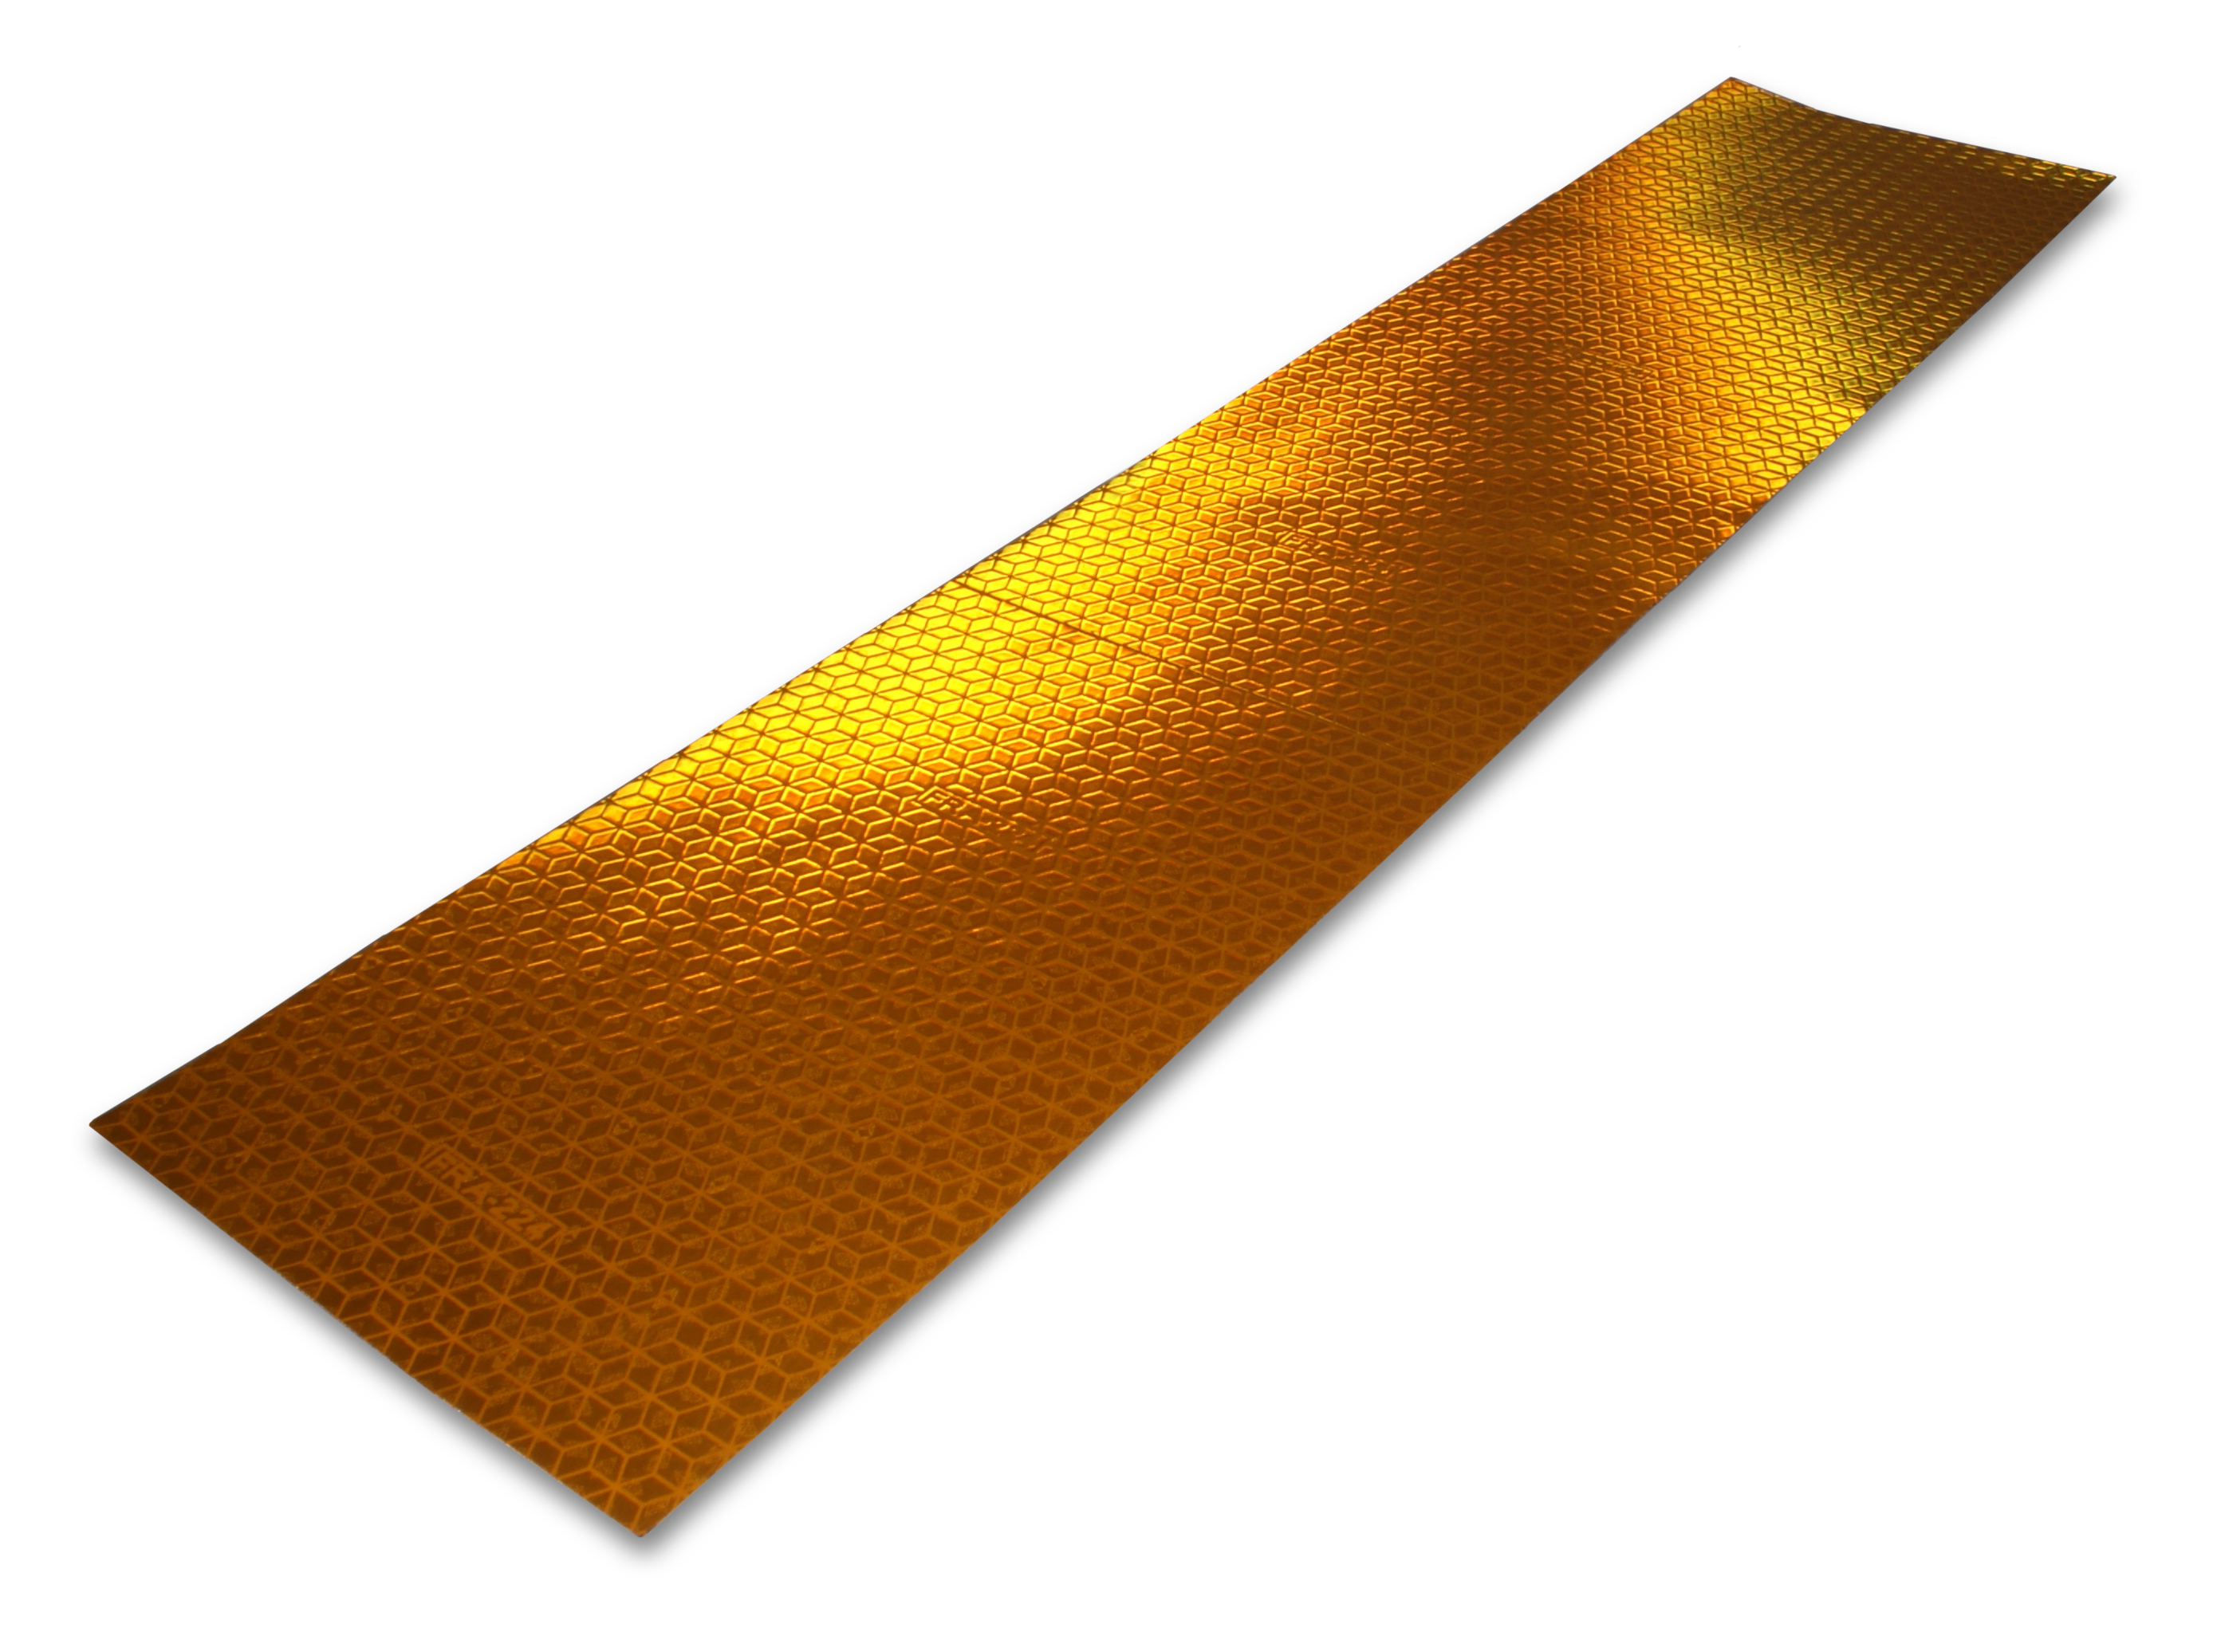 Reflective Tape Strip 4 by 18-Inches Long Yellow: Safety and Compliance